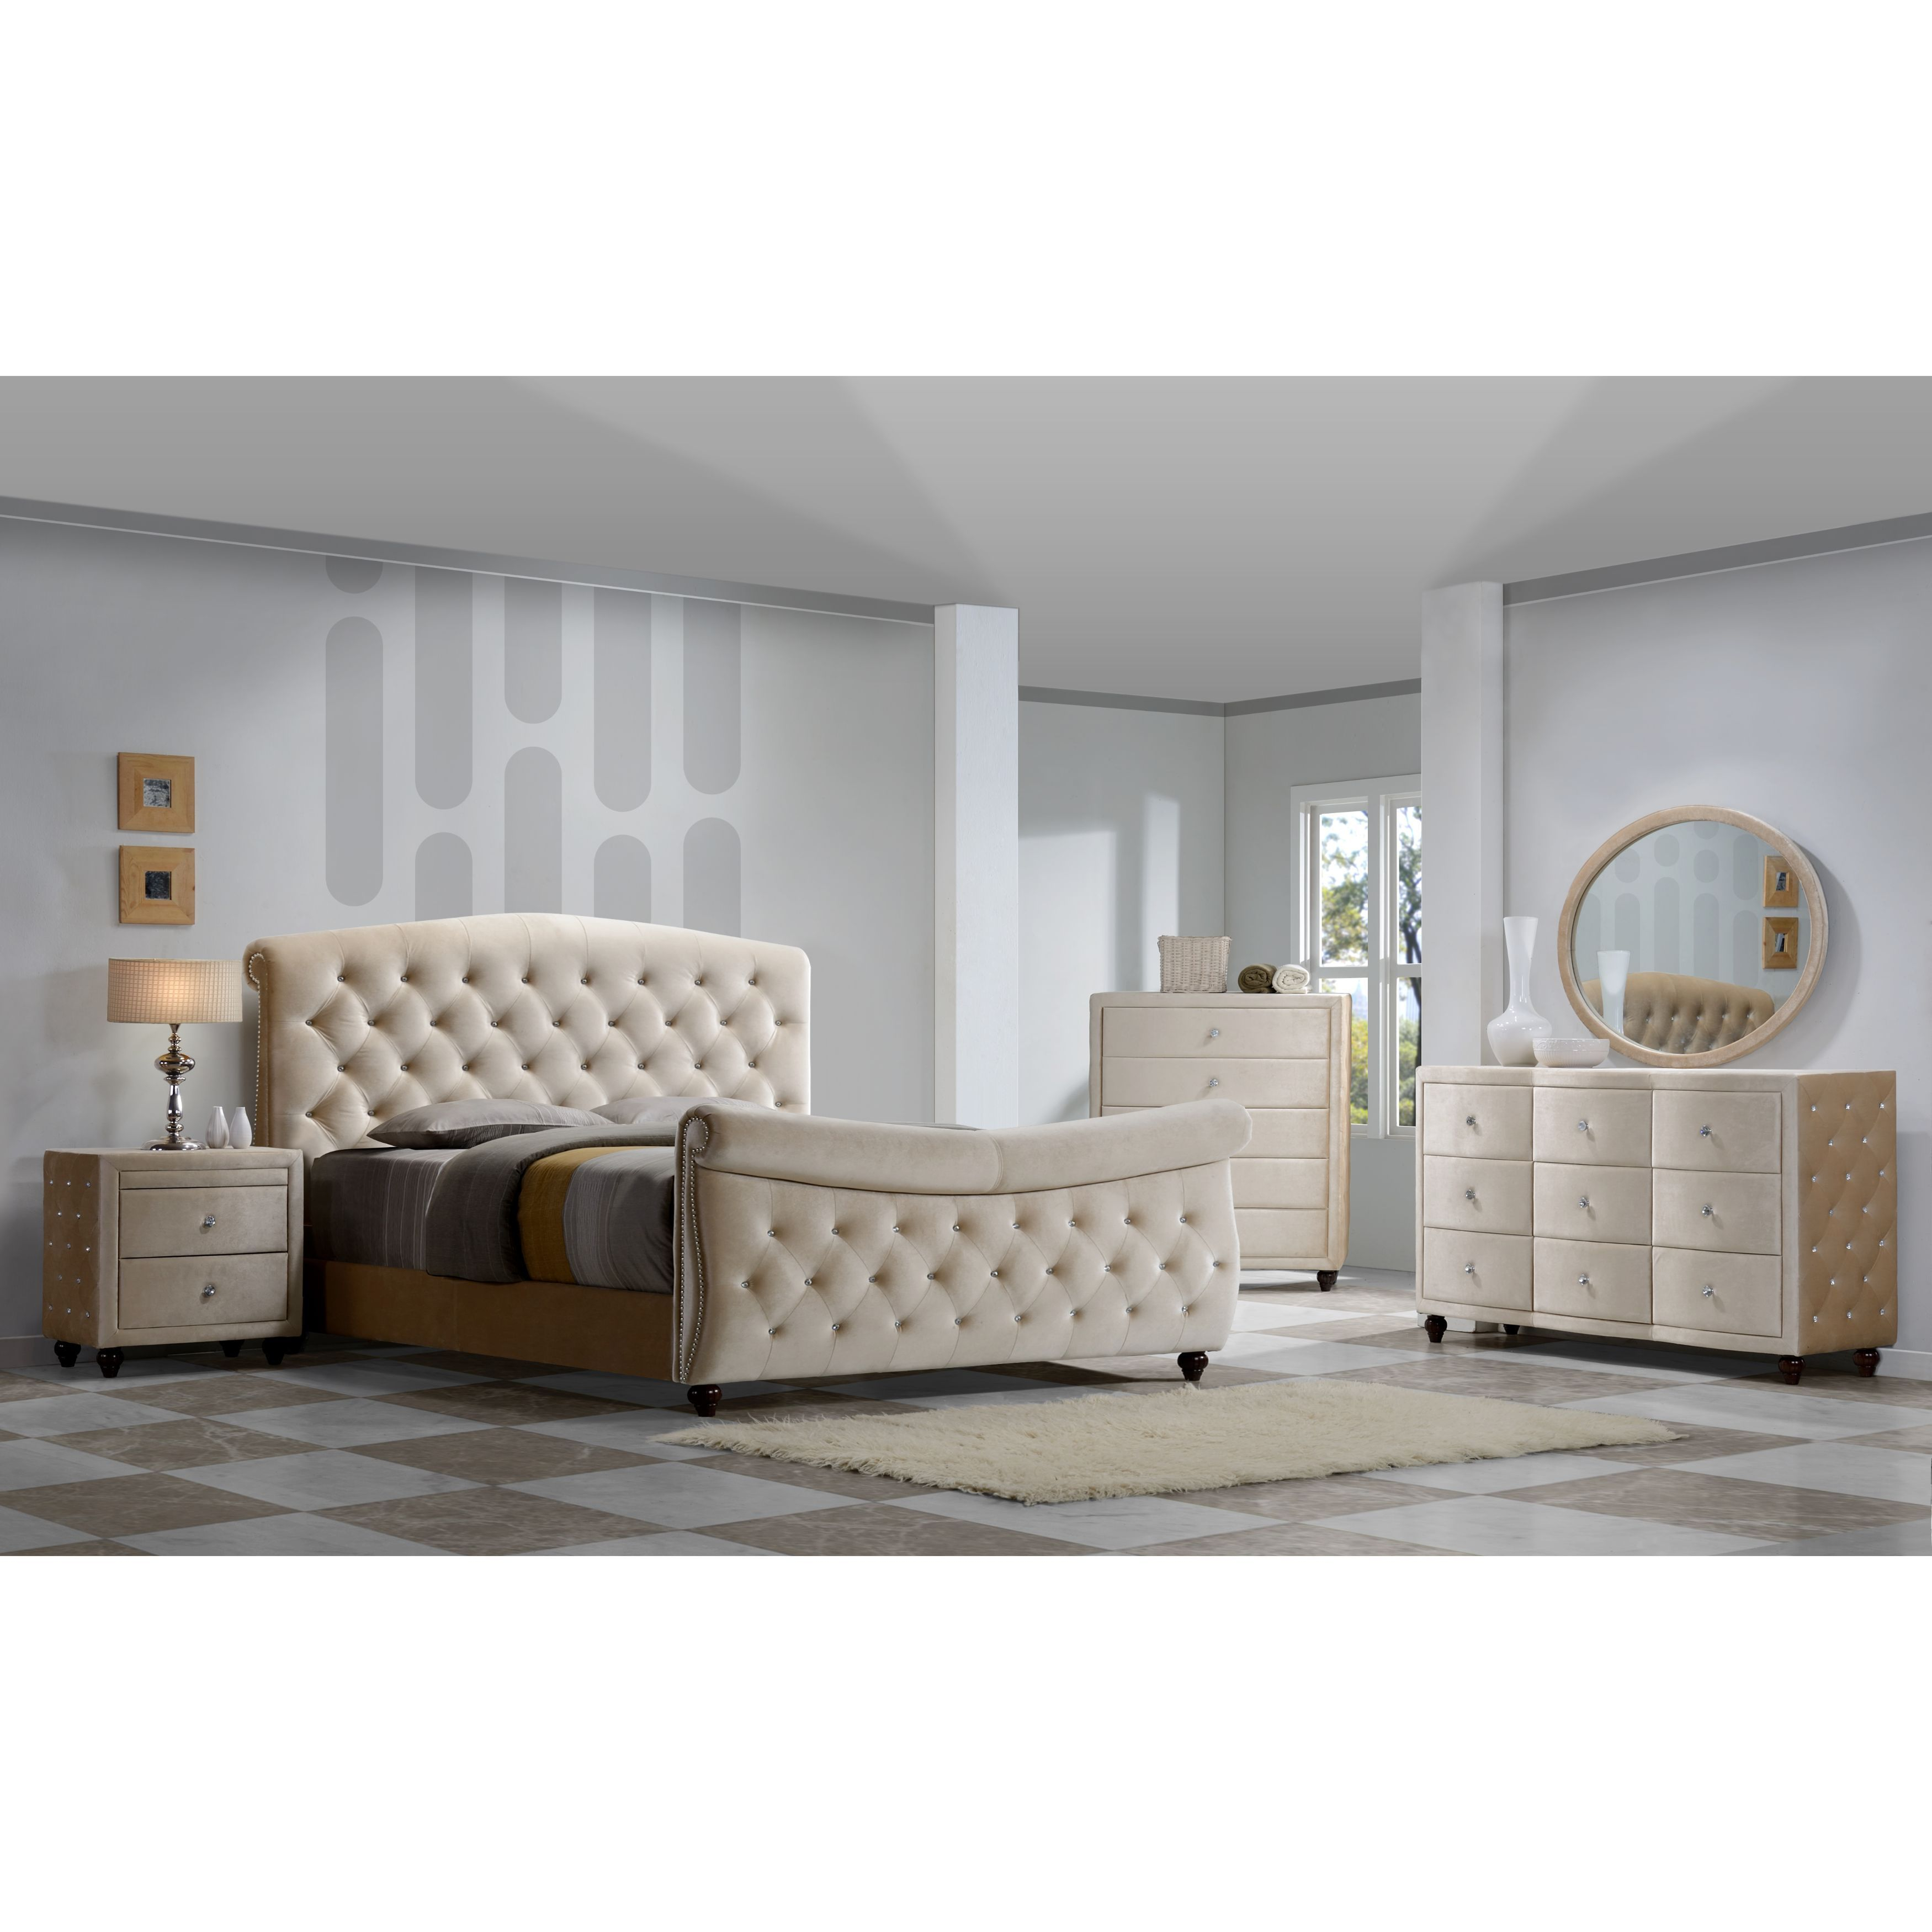 Diamond Sleigh Bed Bedroom Set in dimensions 3500 X 3500